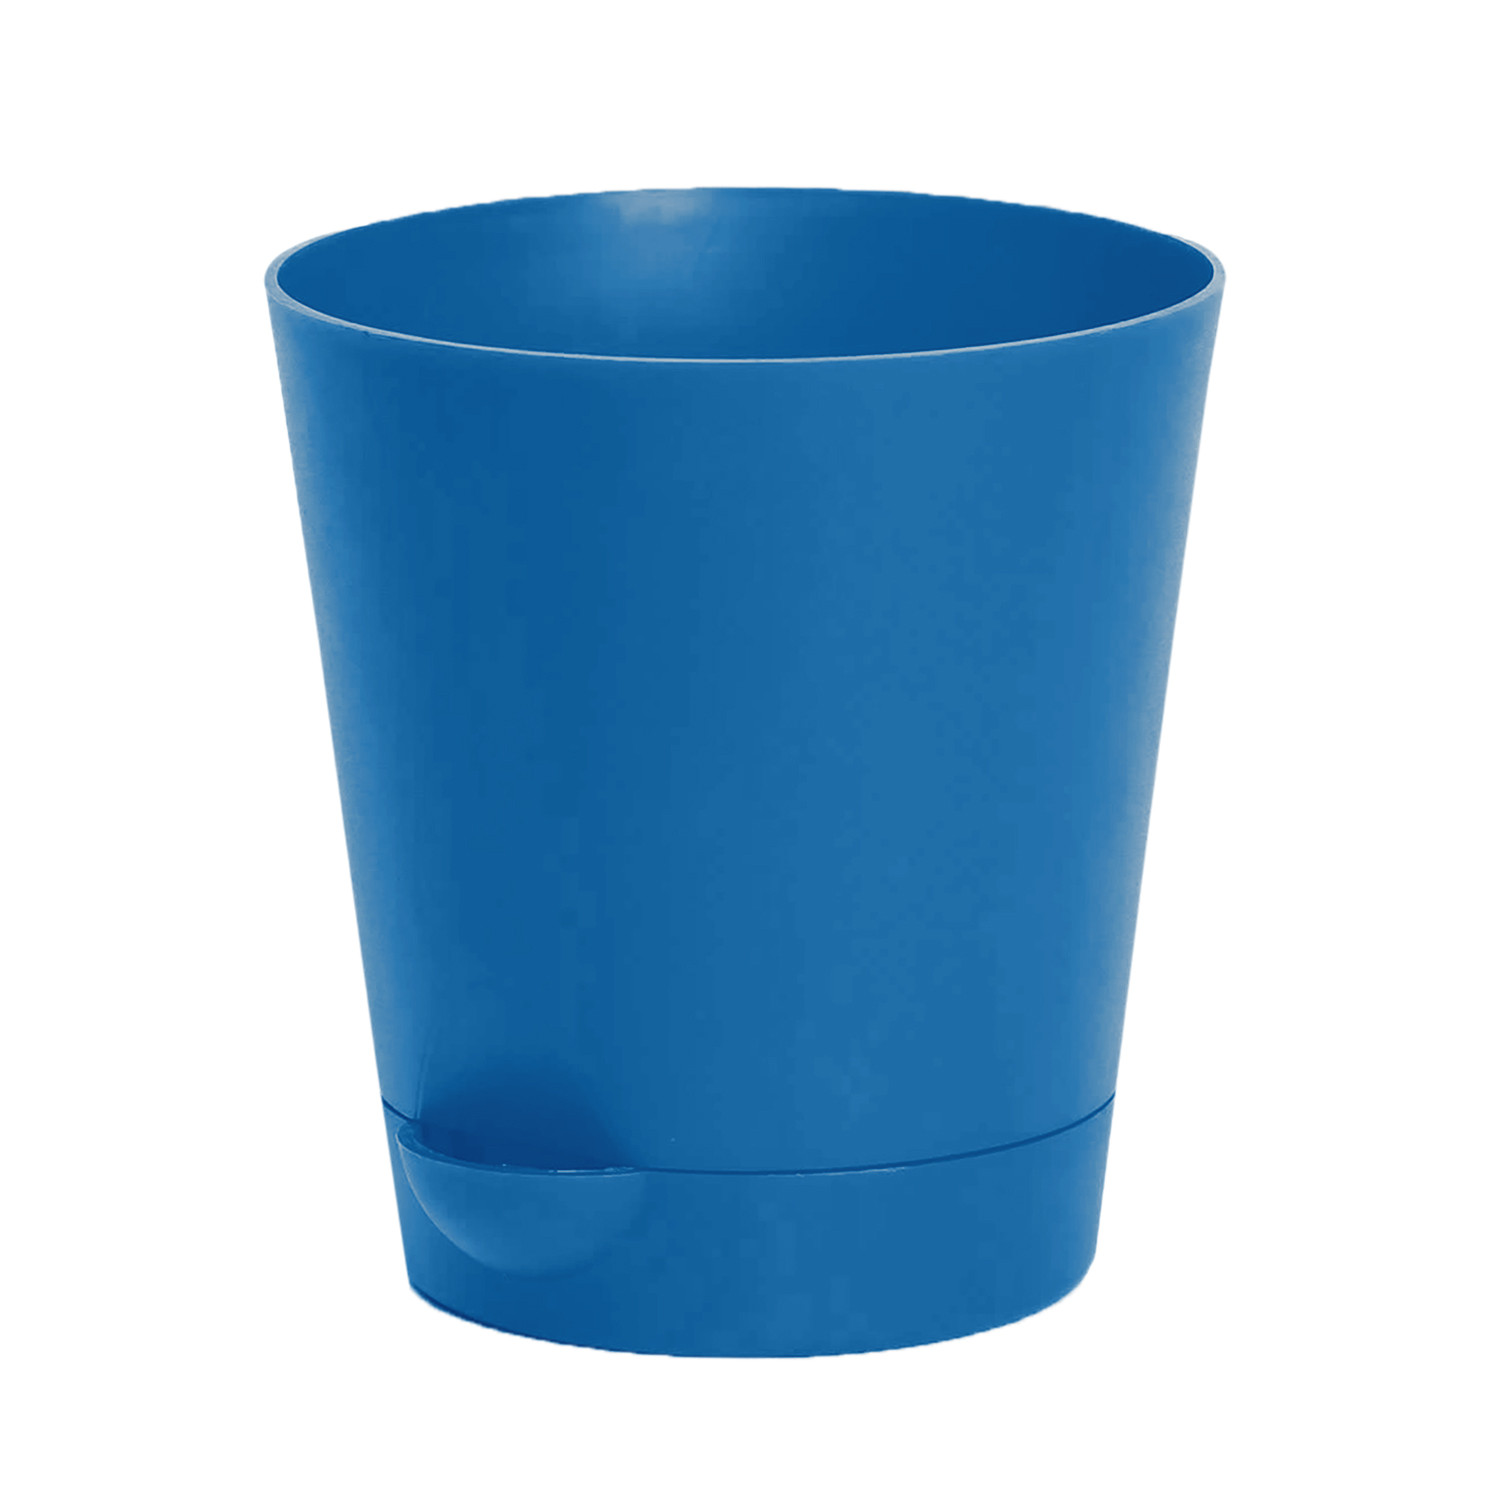 Kuber Industries Plastic Titan Pot|Garden Container For Plants & Flowers|Self-Watering Pot With Drainage Holes,6 Inch (Blue)